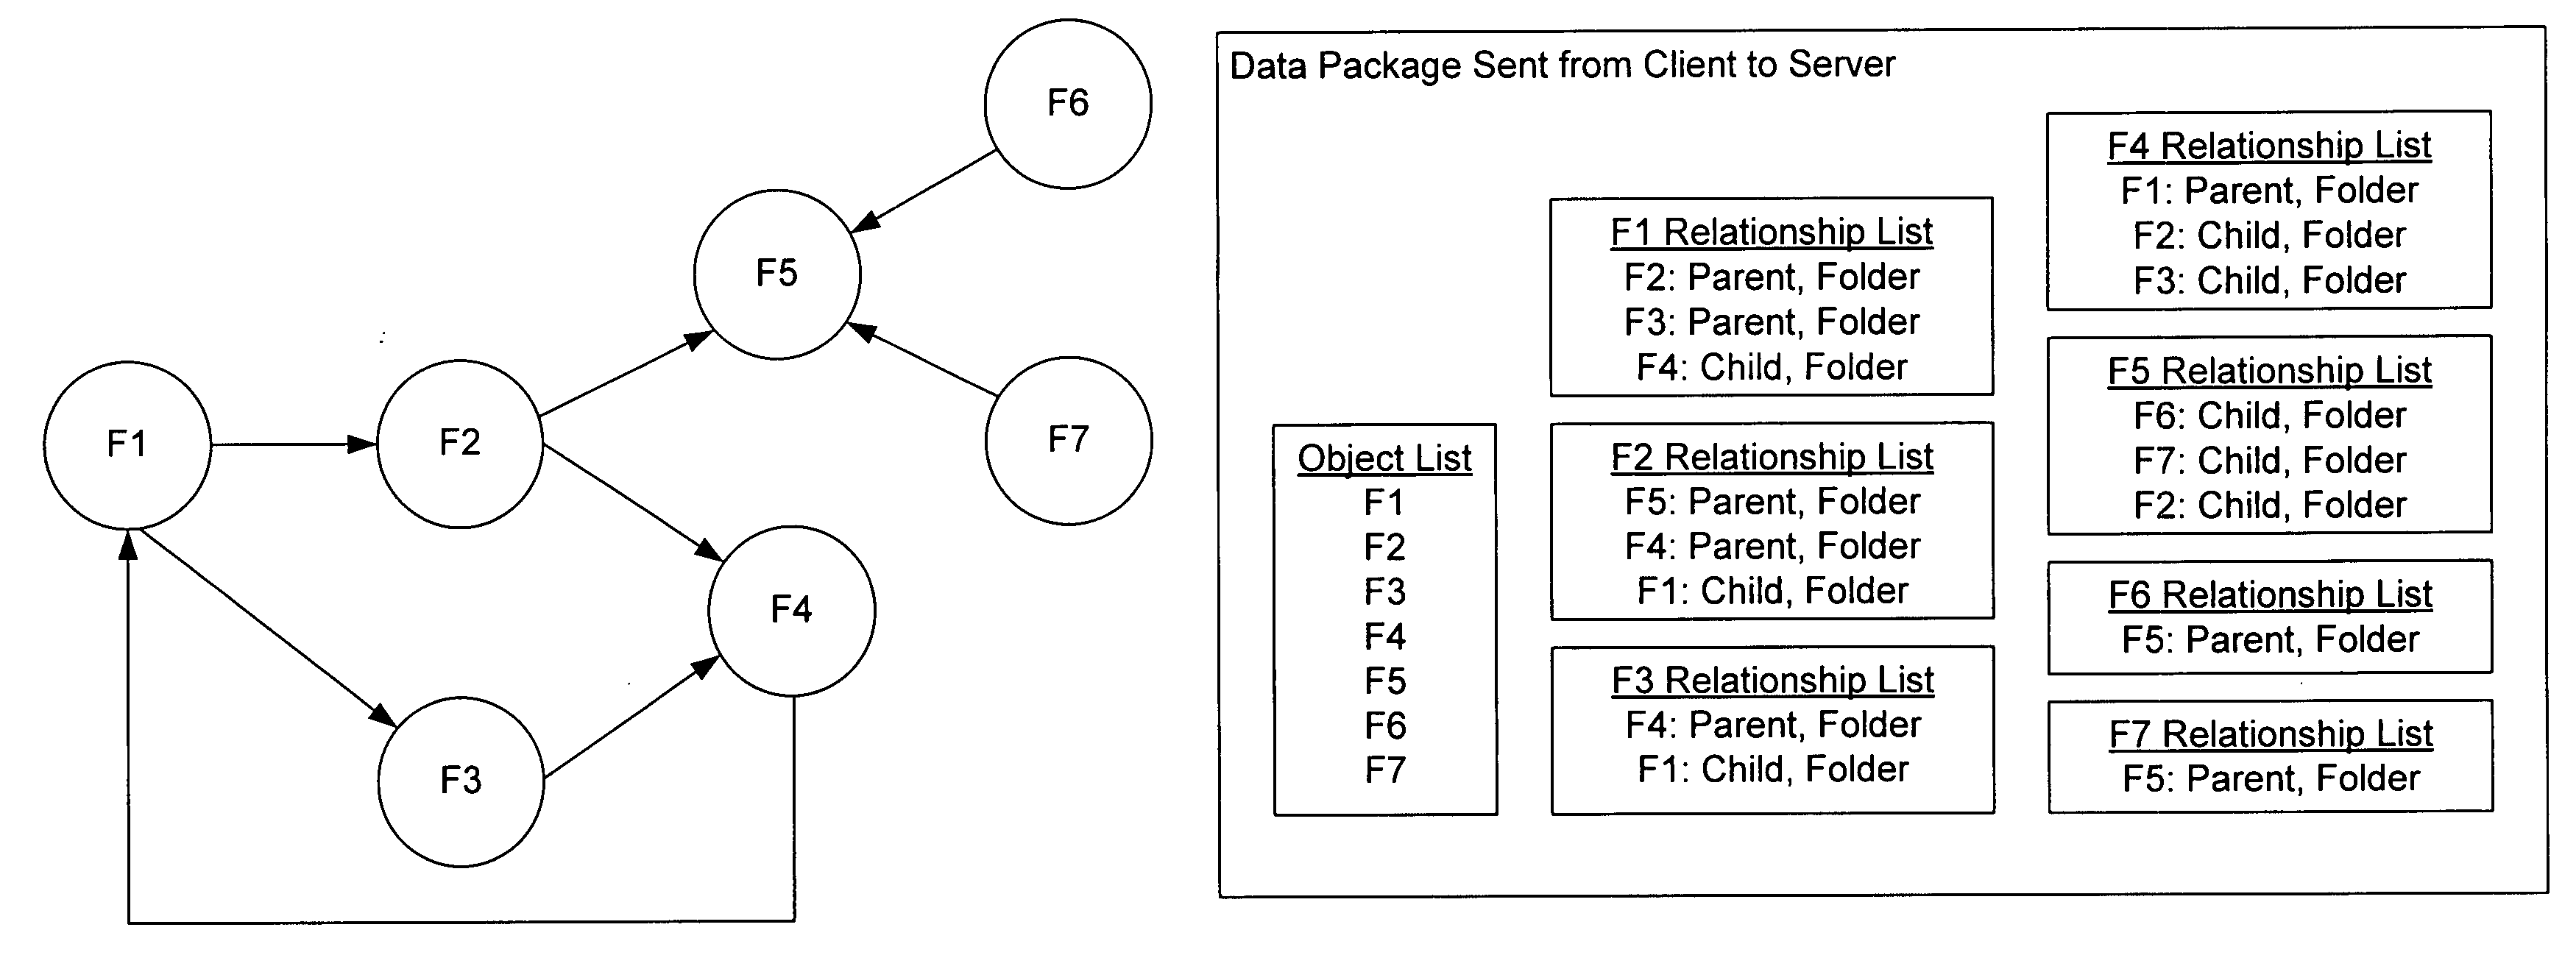 Processing of a generalized directed object graph for storage in a relational database